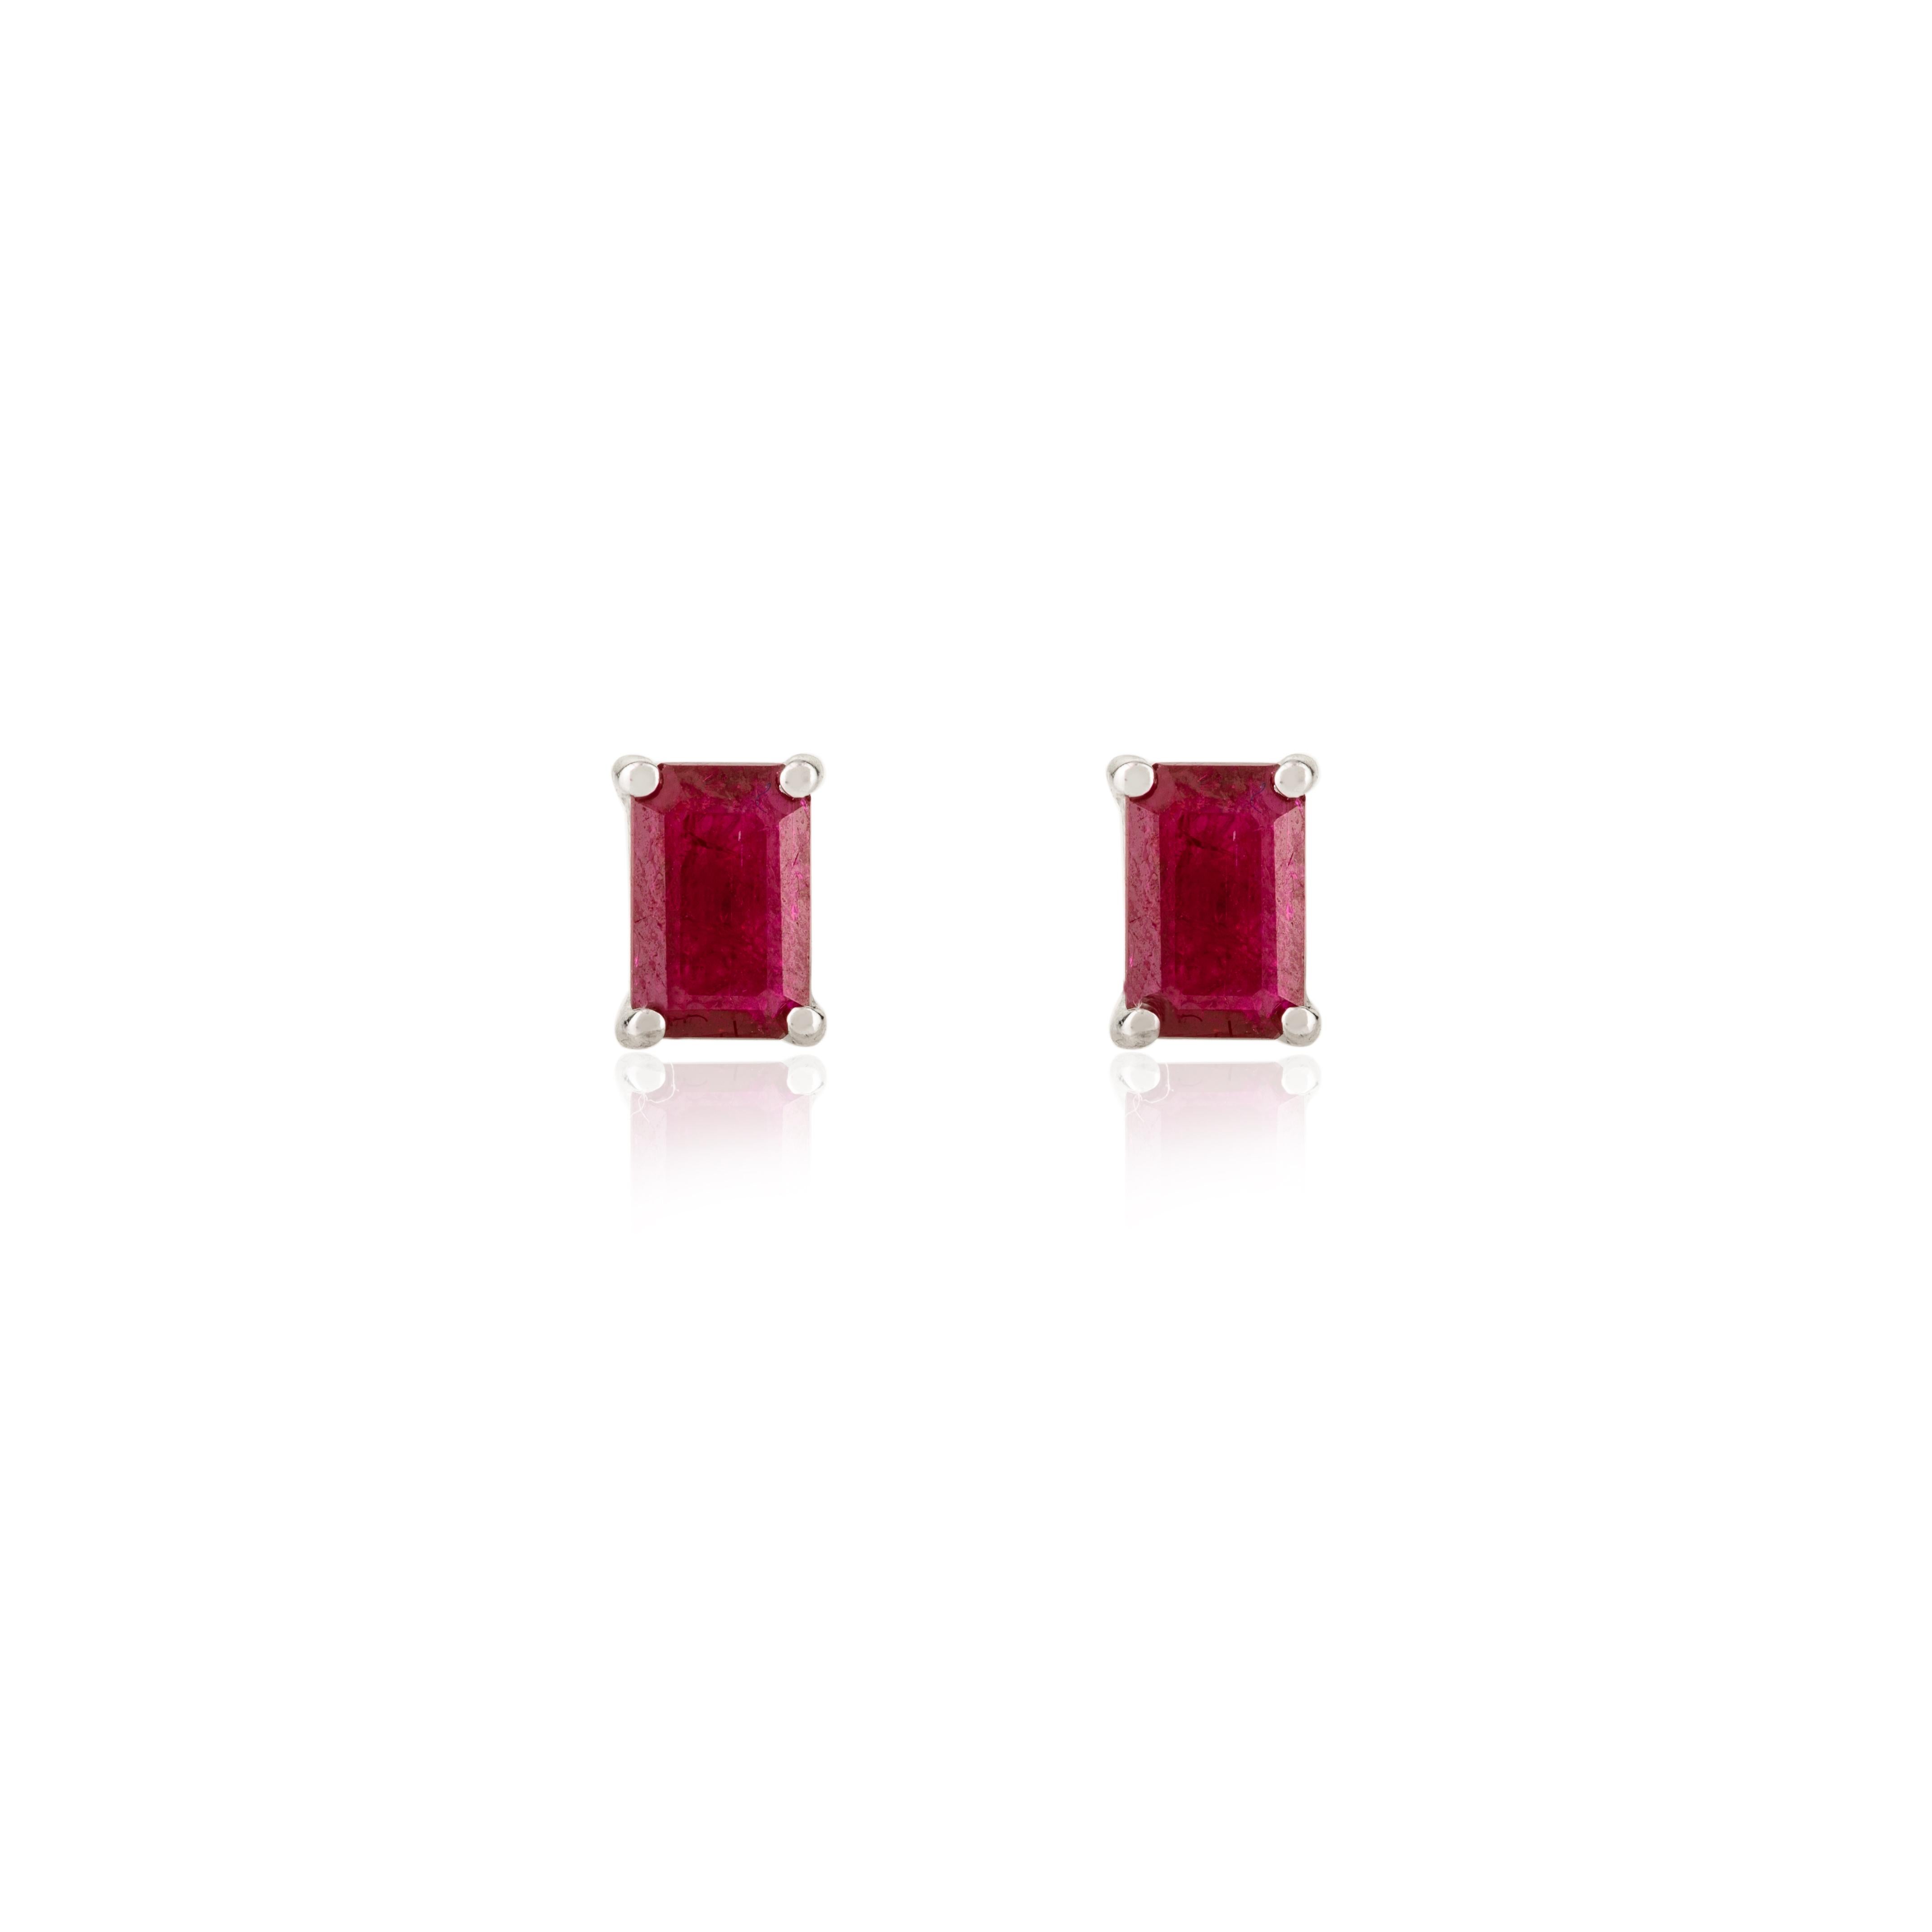 Modern Dainty Natural Ruby Gemstone Stud Earrings in 14 Karat Solid White Gold For Sale